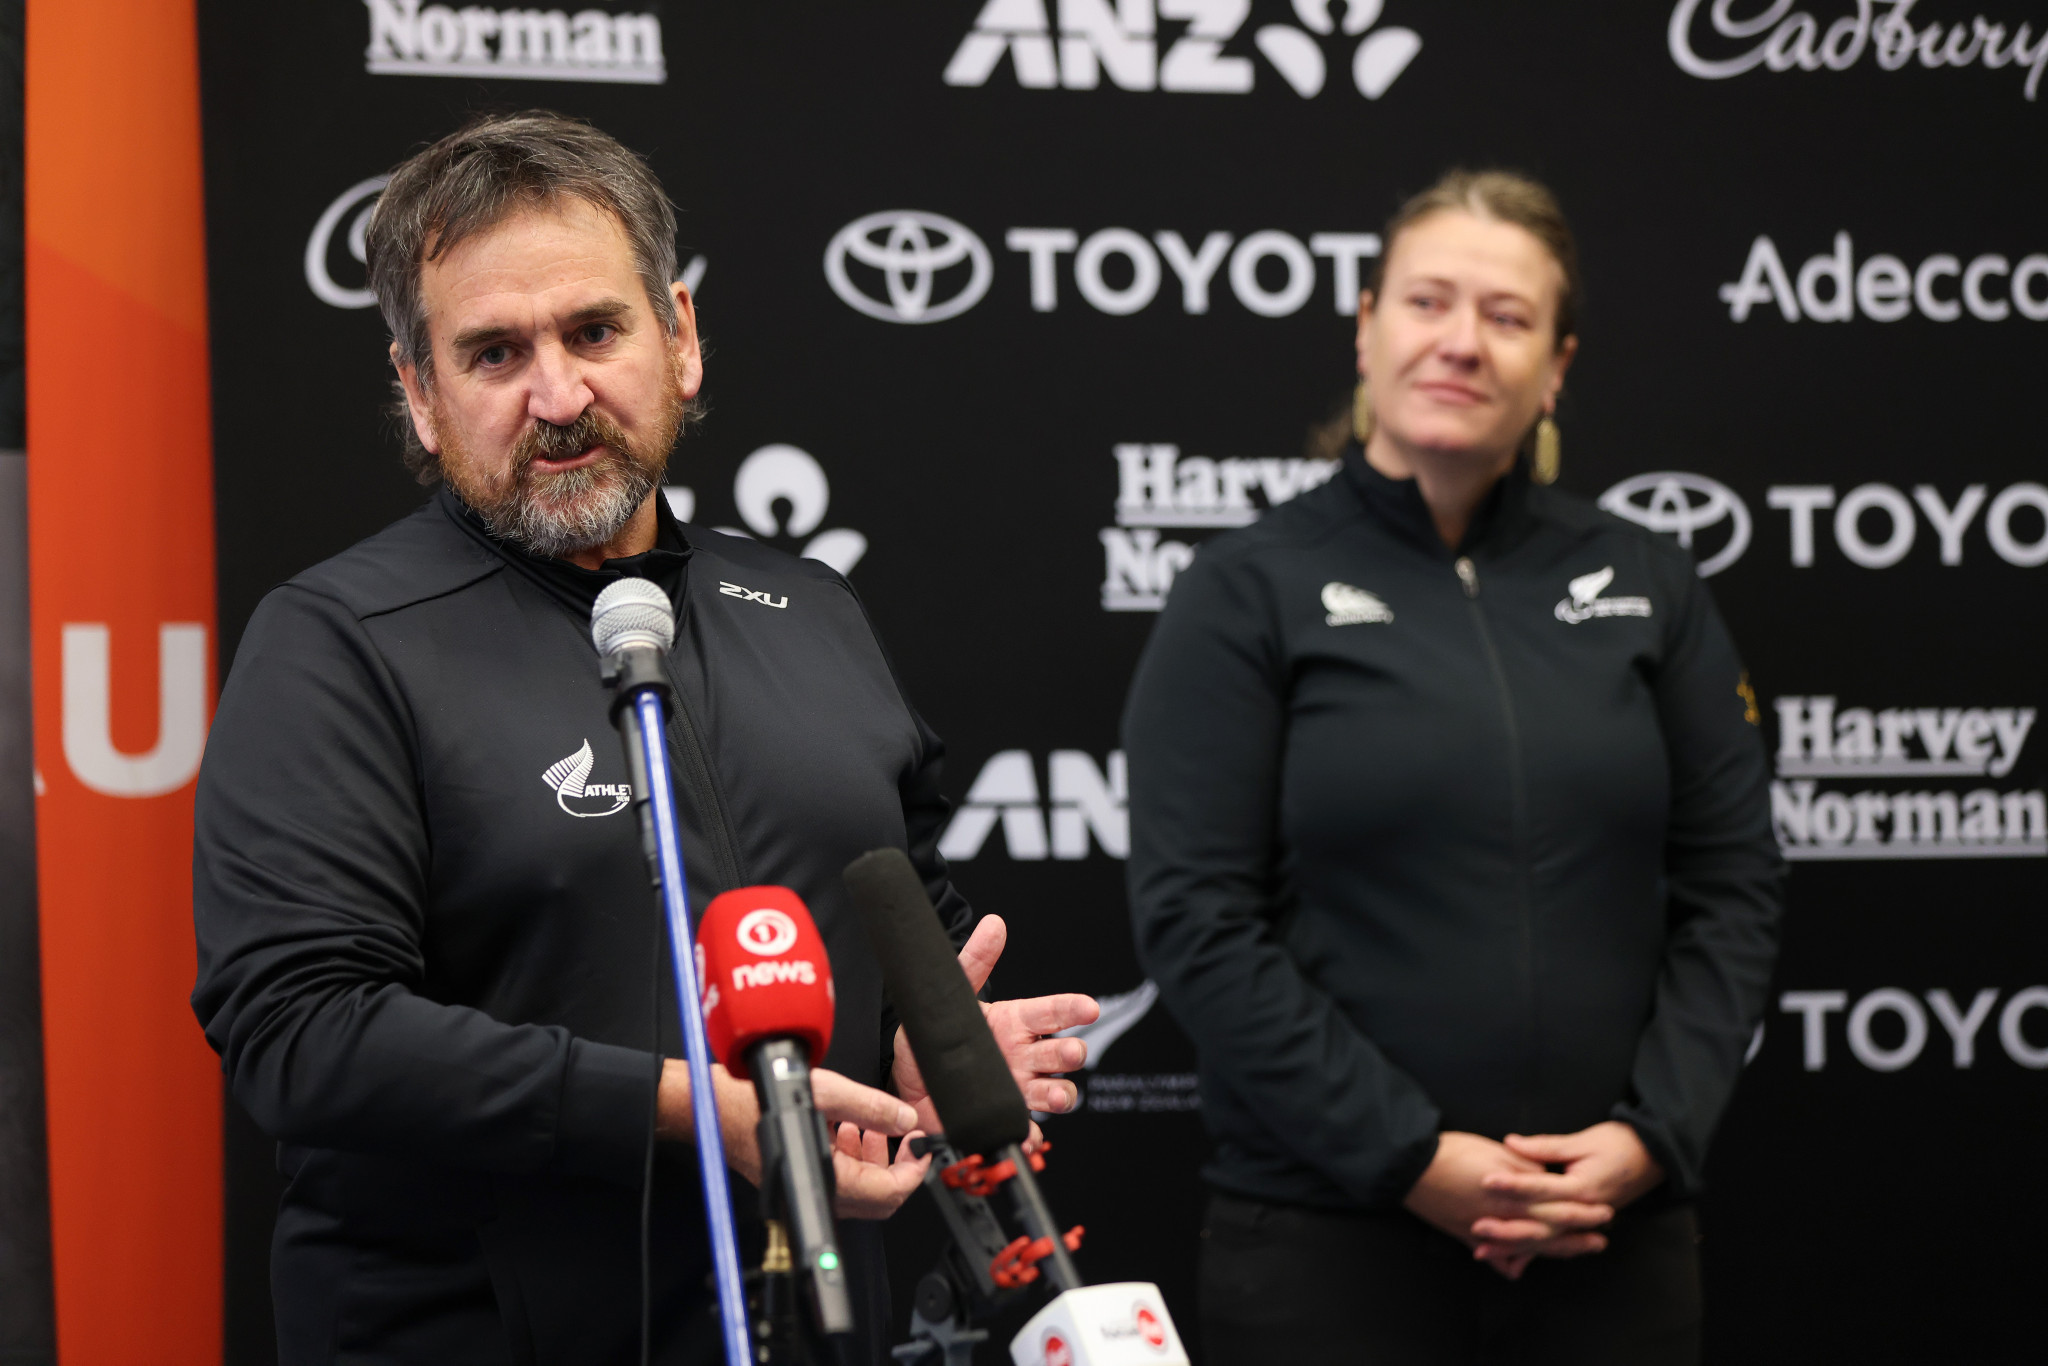 Scott Goodman will step down as high-performance director after 11 years in the role at Athletics New Zealand ©Getty Images